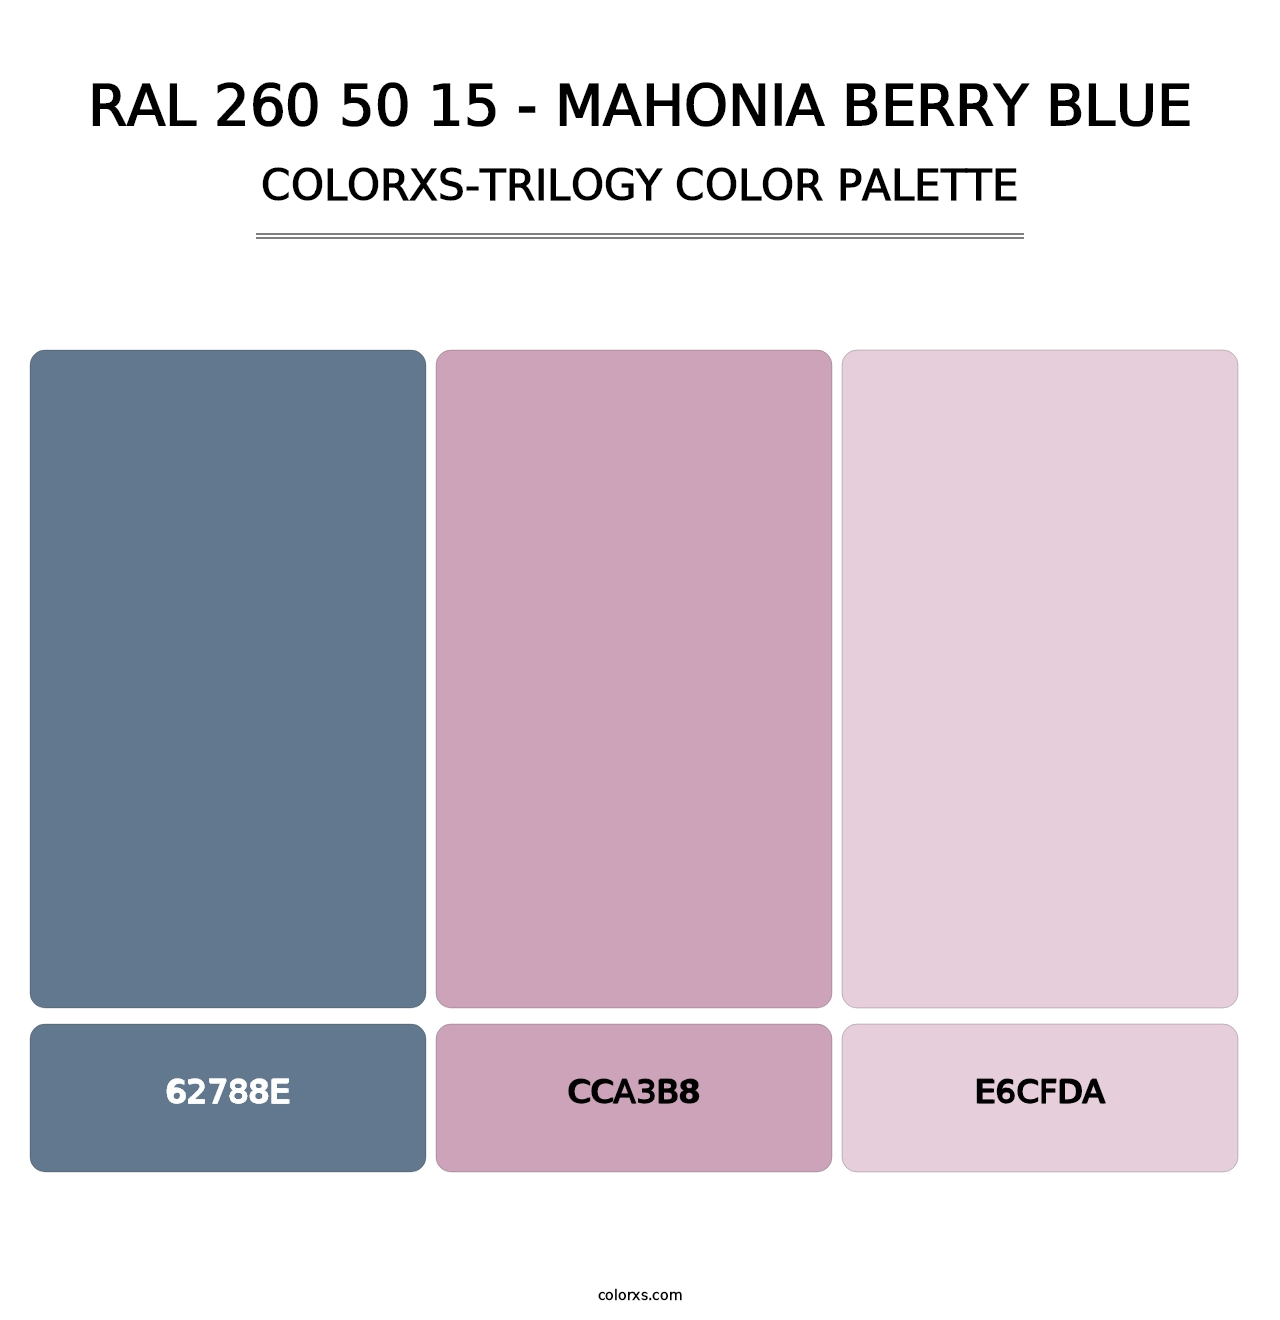 RAL 260 50 15 - Mahonia Berry Blue - Colorxs Trilogy Palette